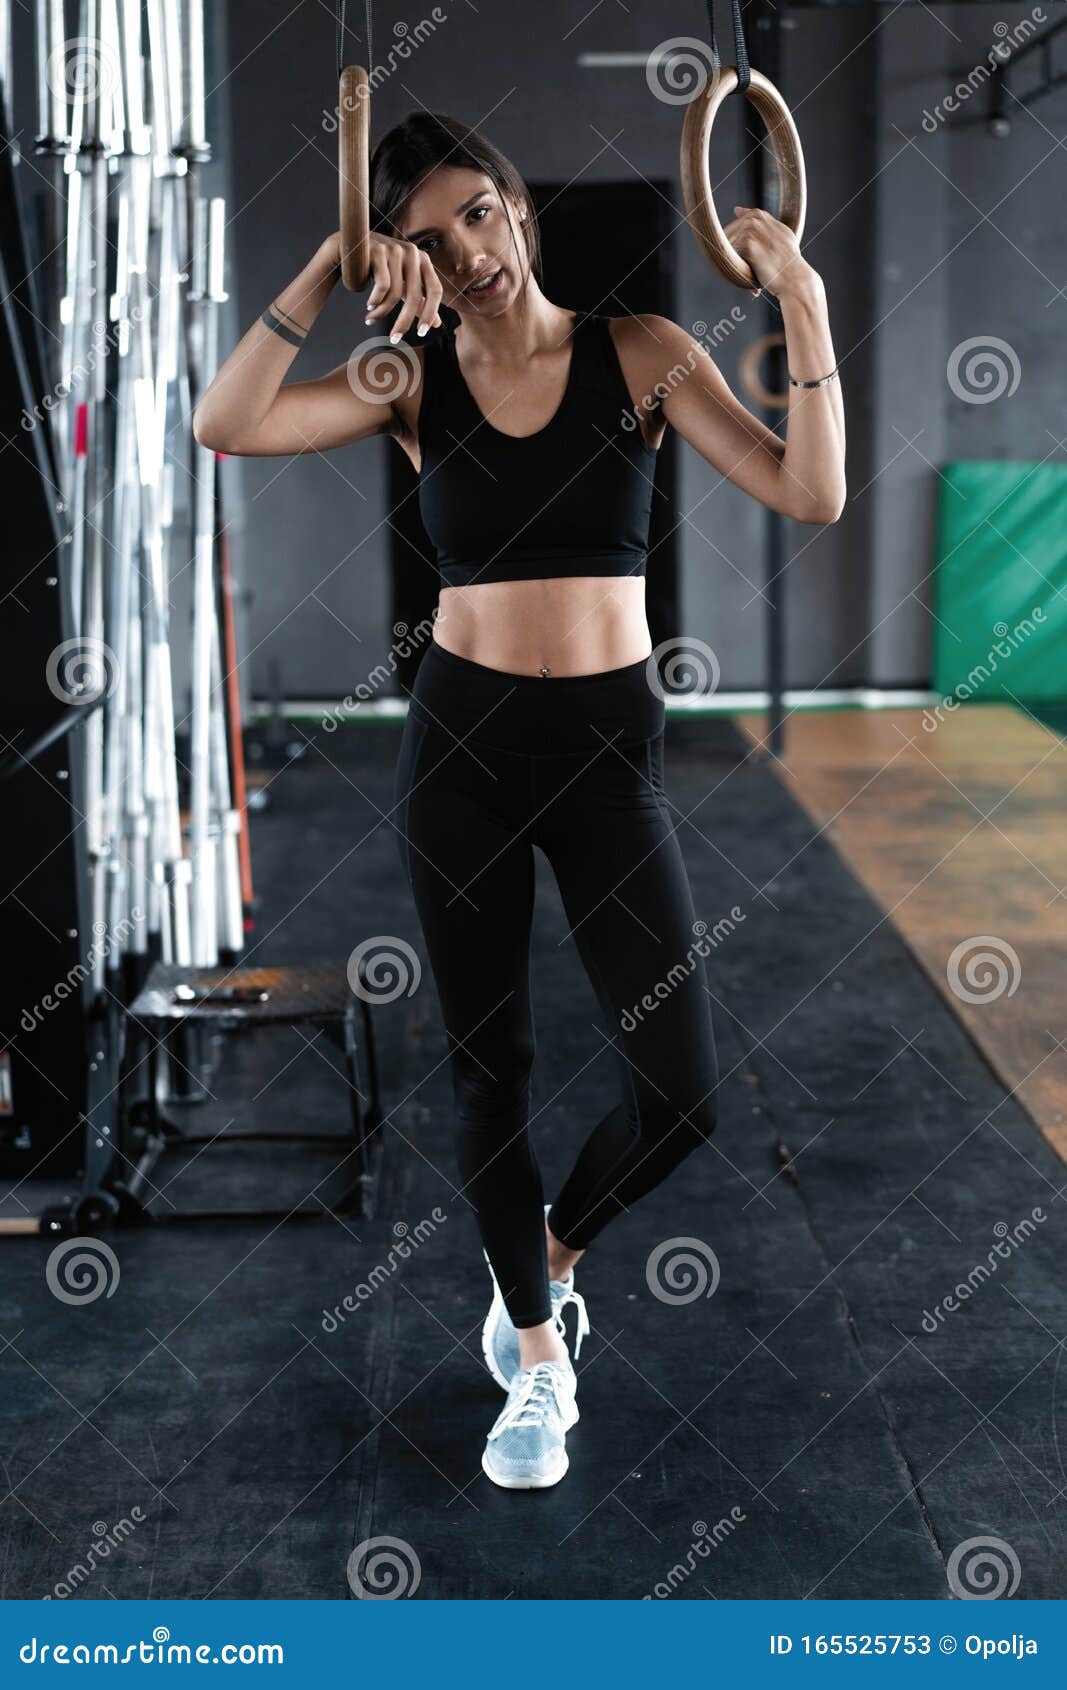 Working out Young athletic sportswoman exercising on gymnastic